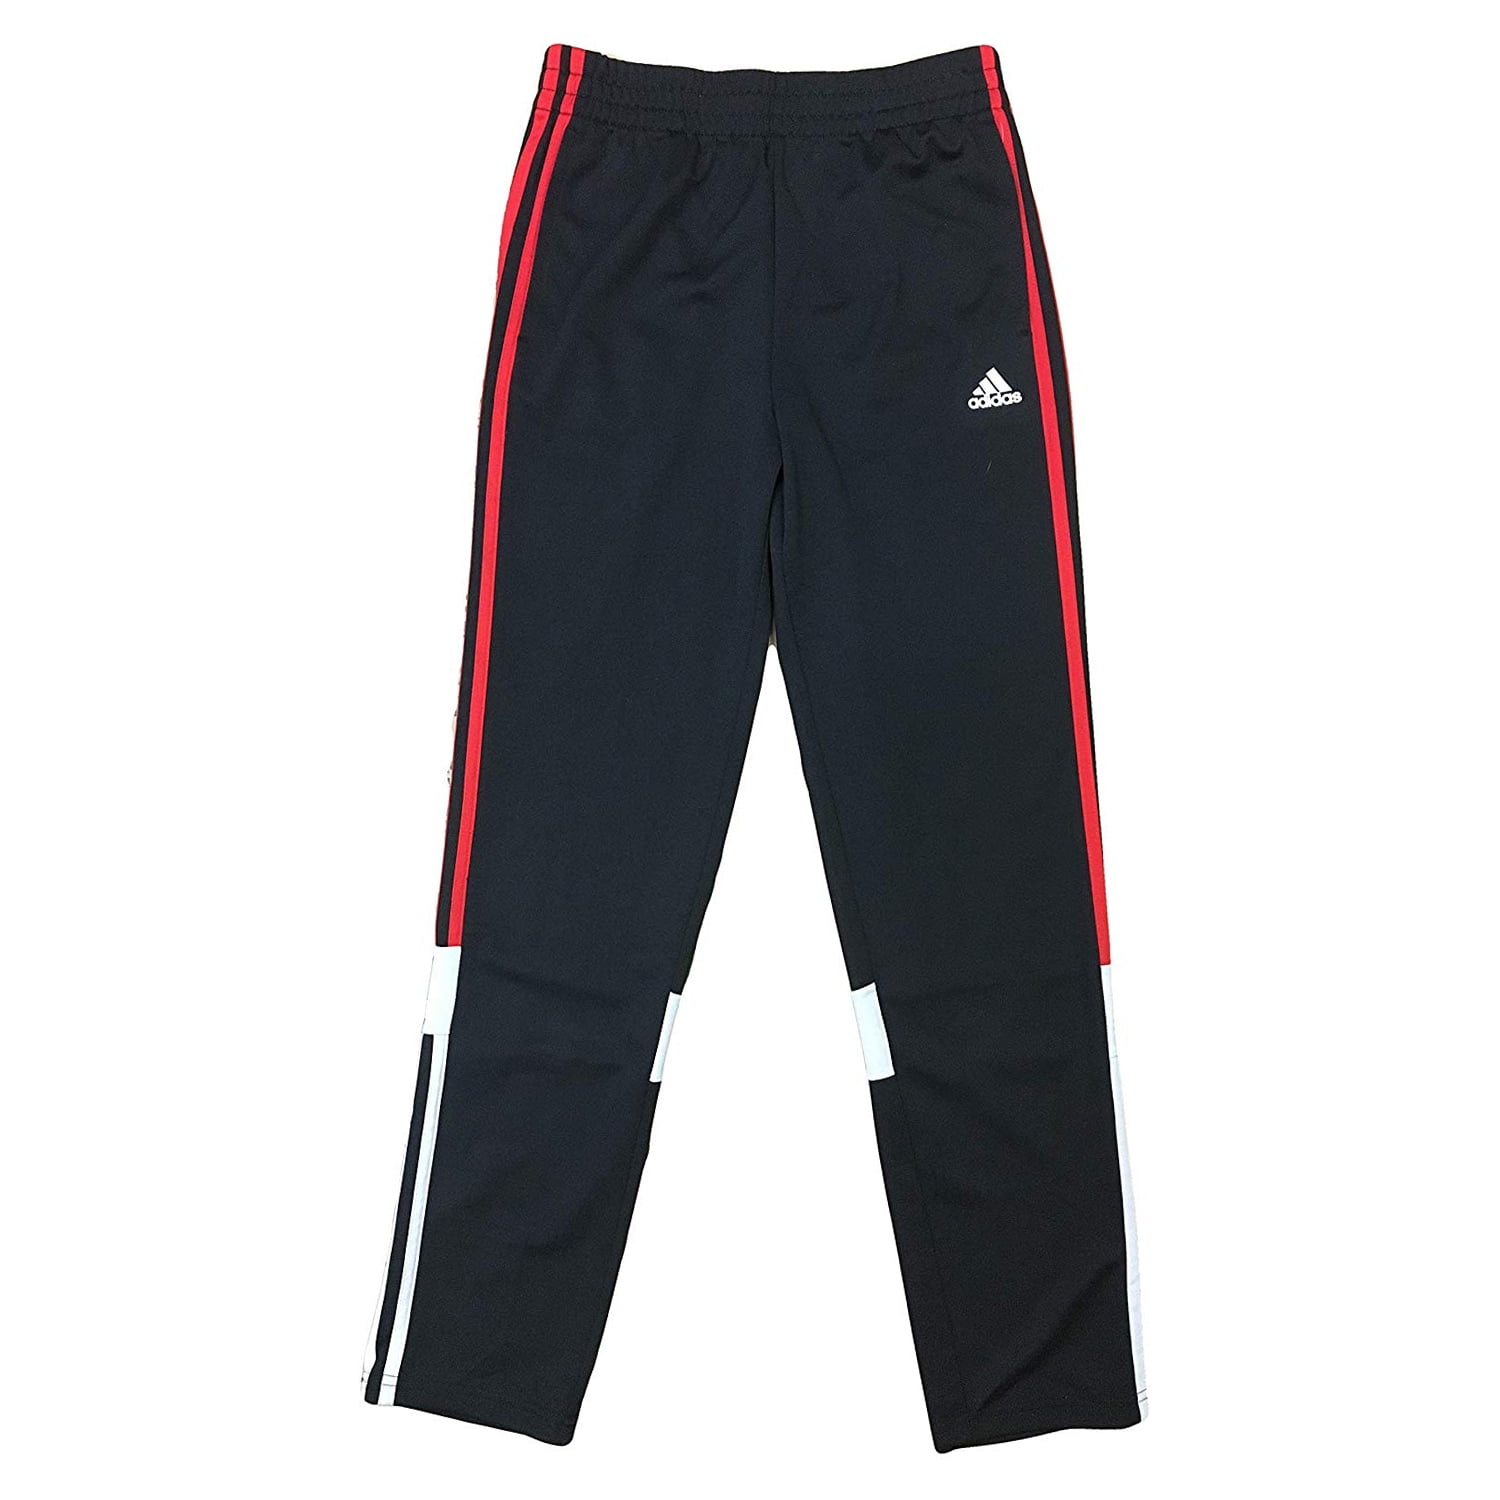 Adidas Boy's Youth 3 Stripes Performance Midfielder Up Track Pants ( Black/Red, -